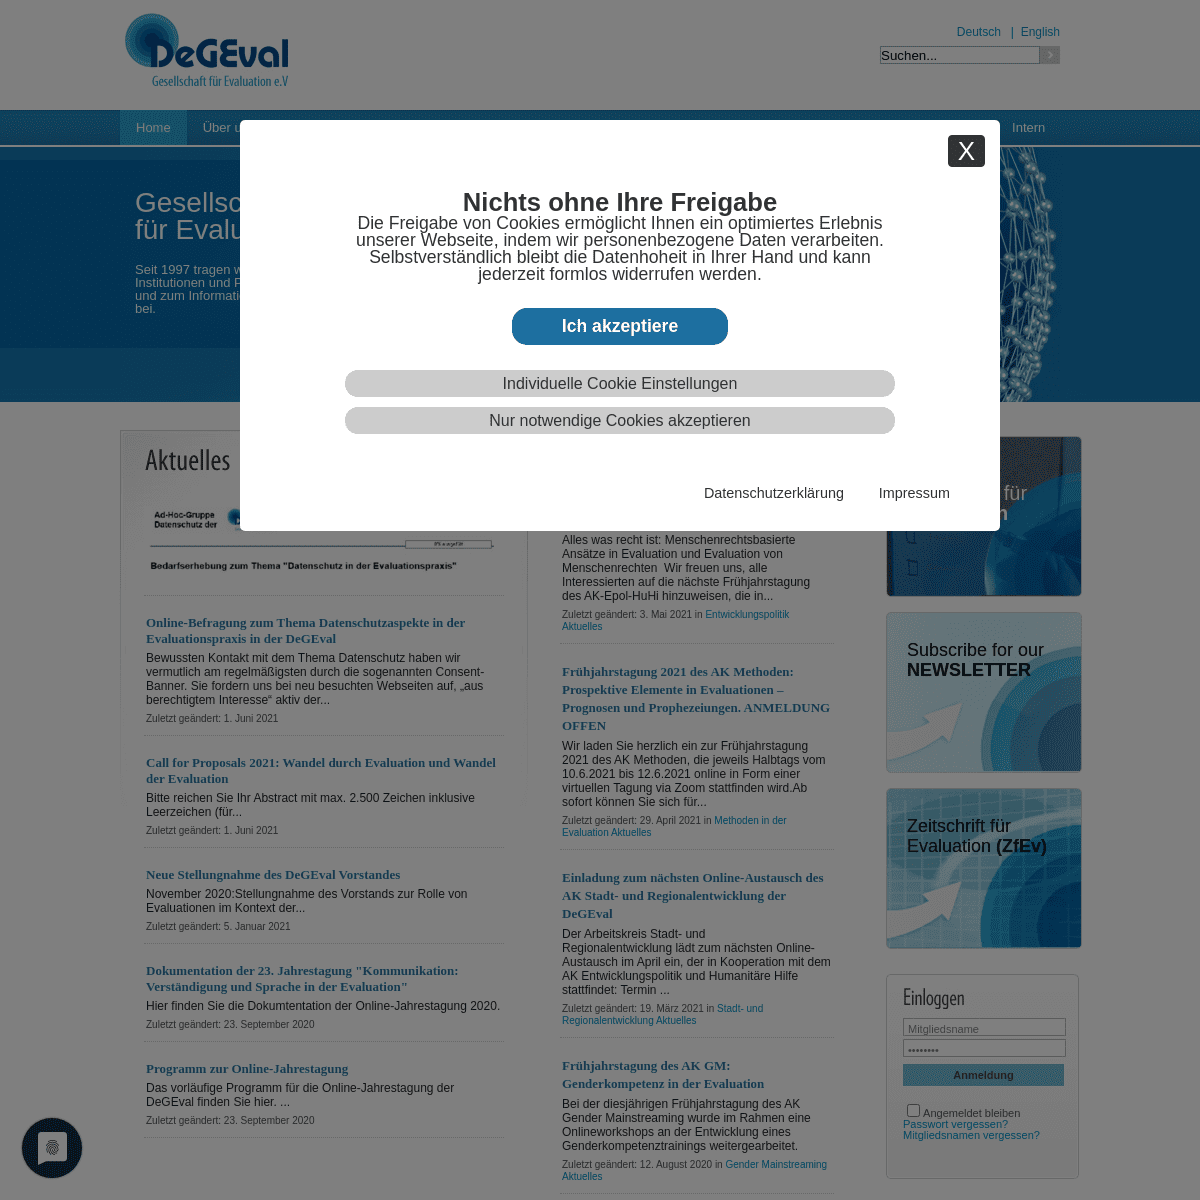 A complete backup of https://degeval.org